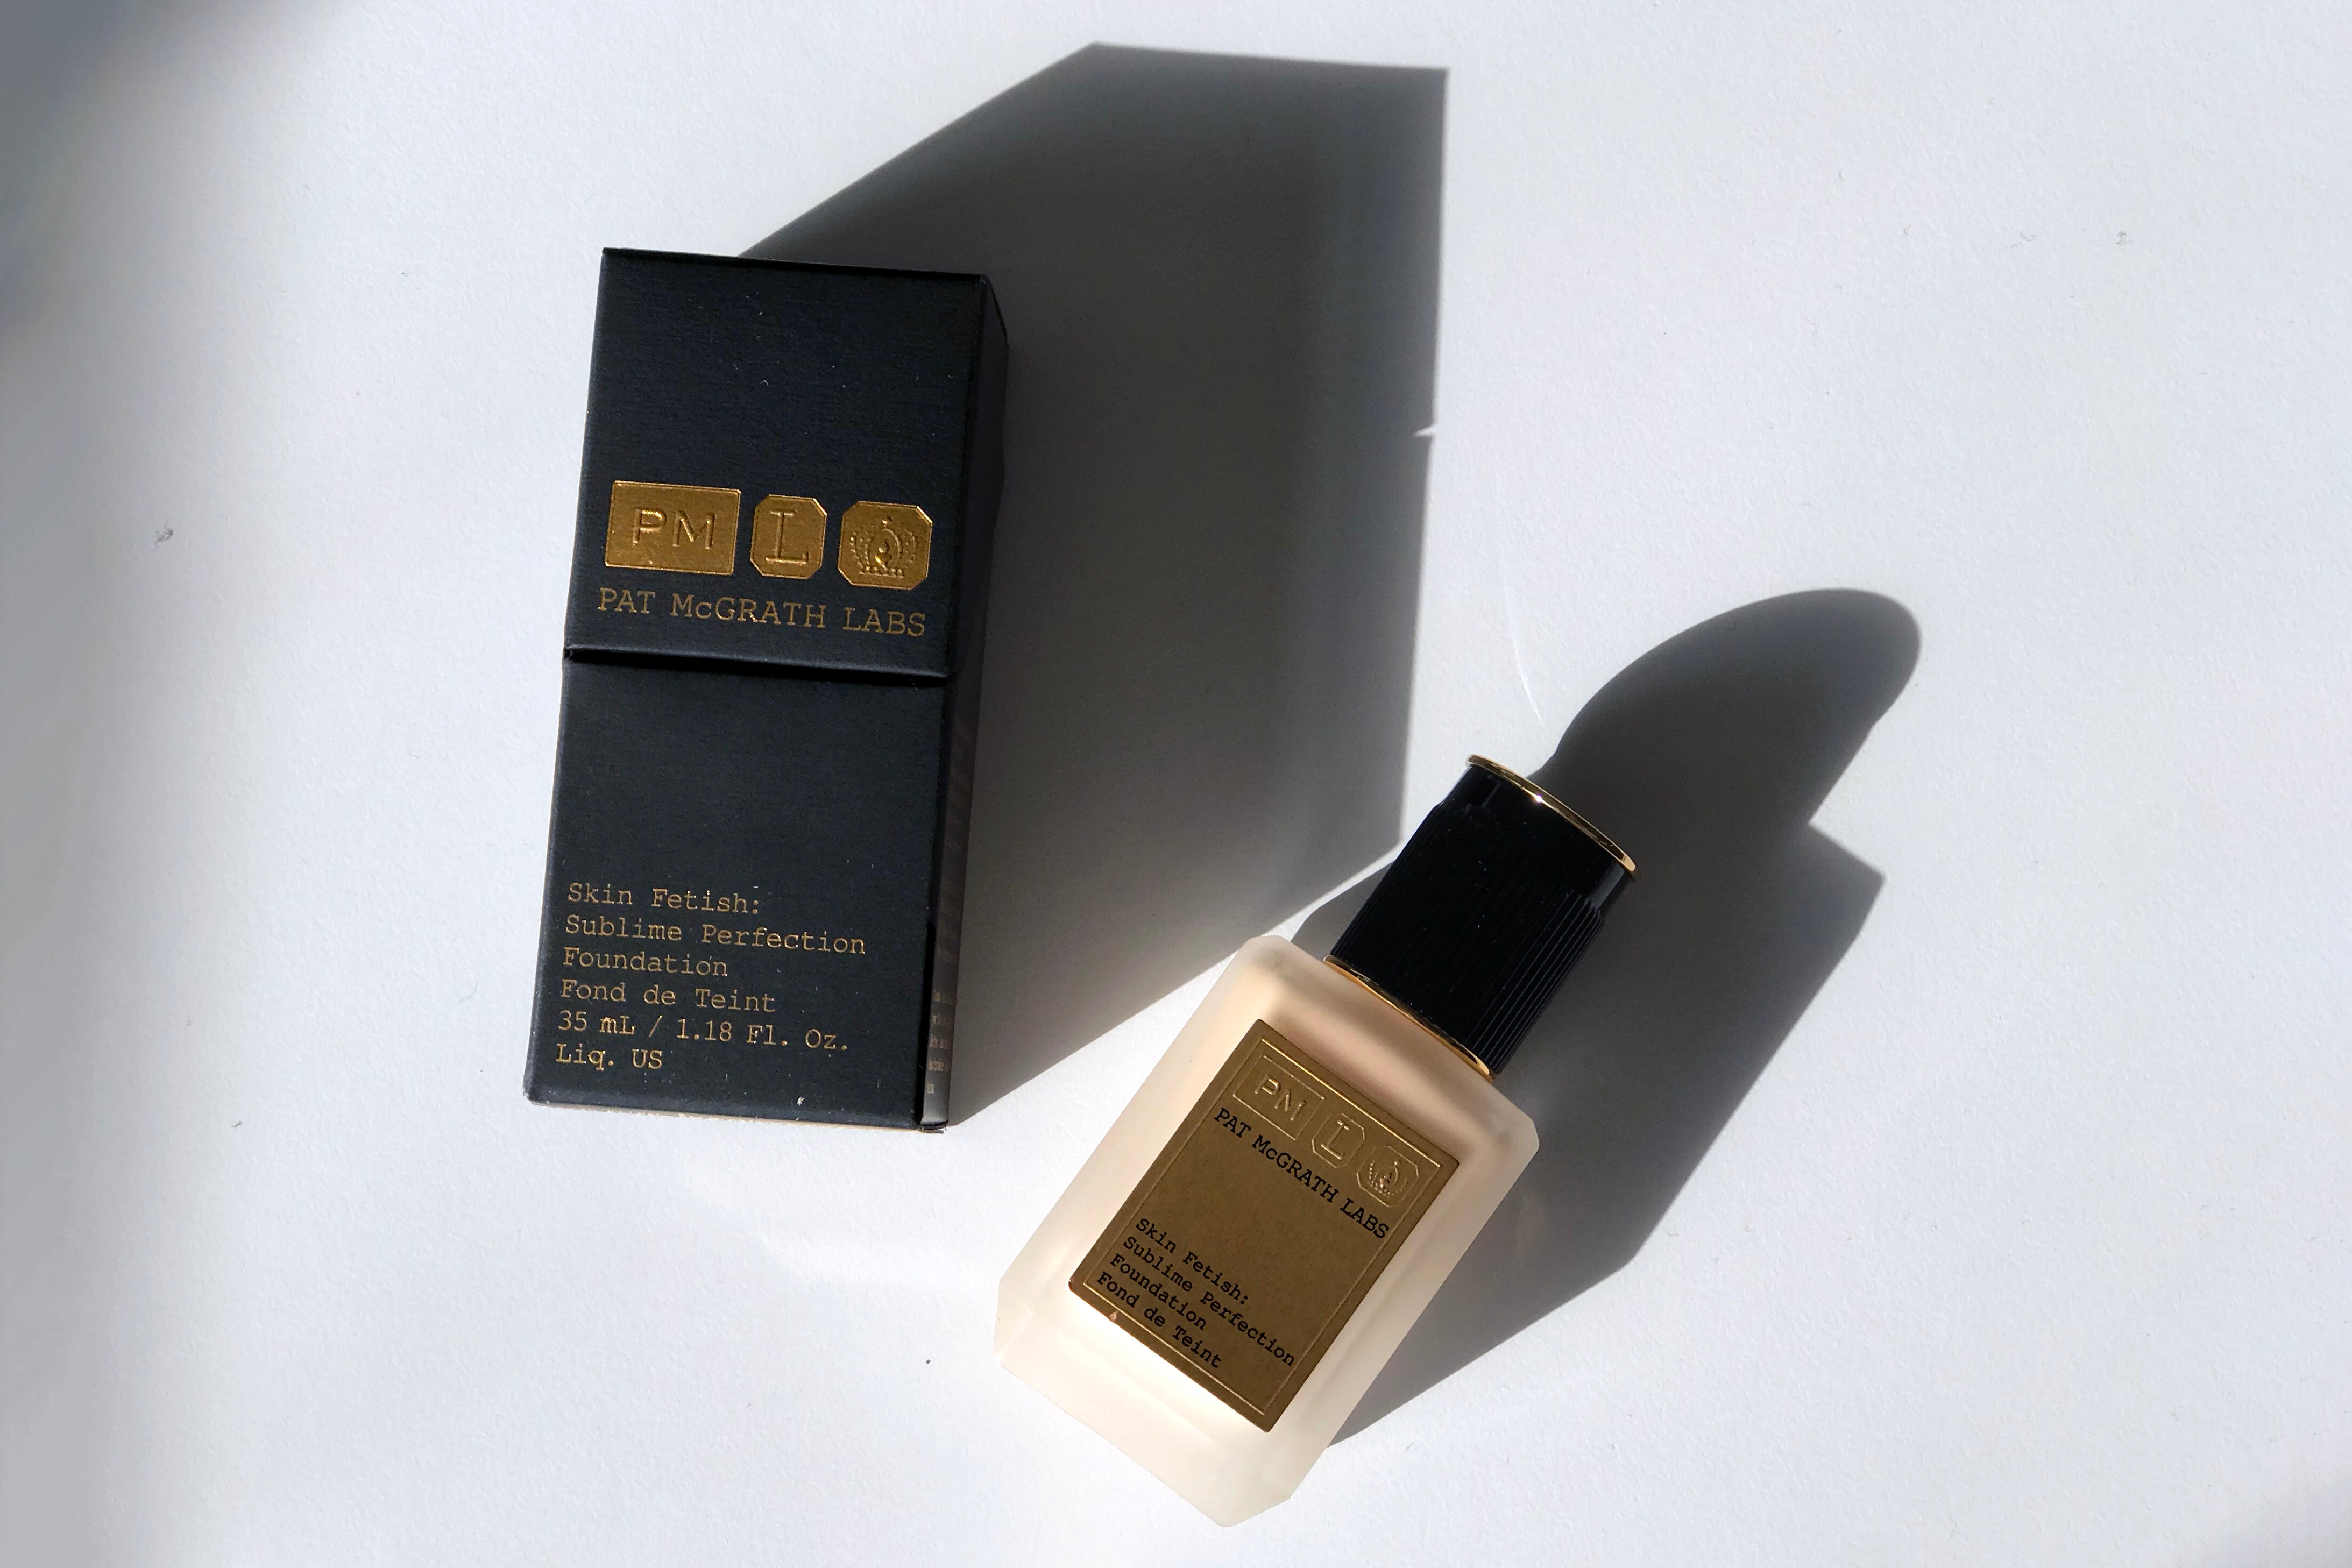 Pat McGrath Sublime Perfection Foundation Review Beauty Makeup Skin Fetish Collection Price 